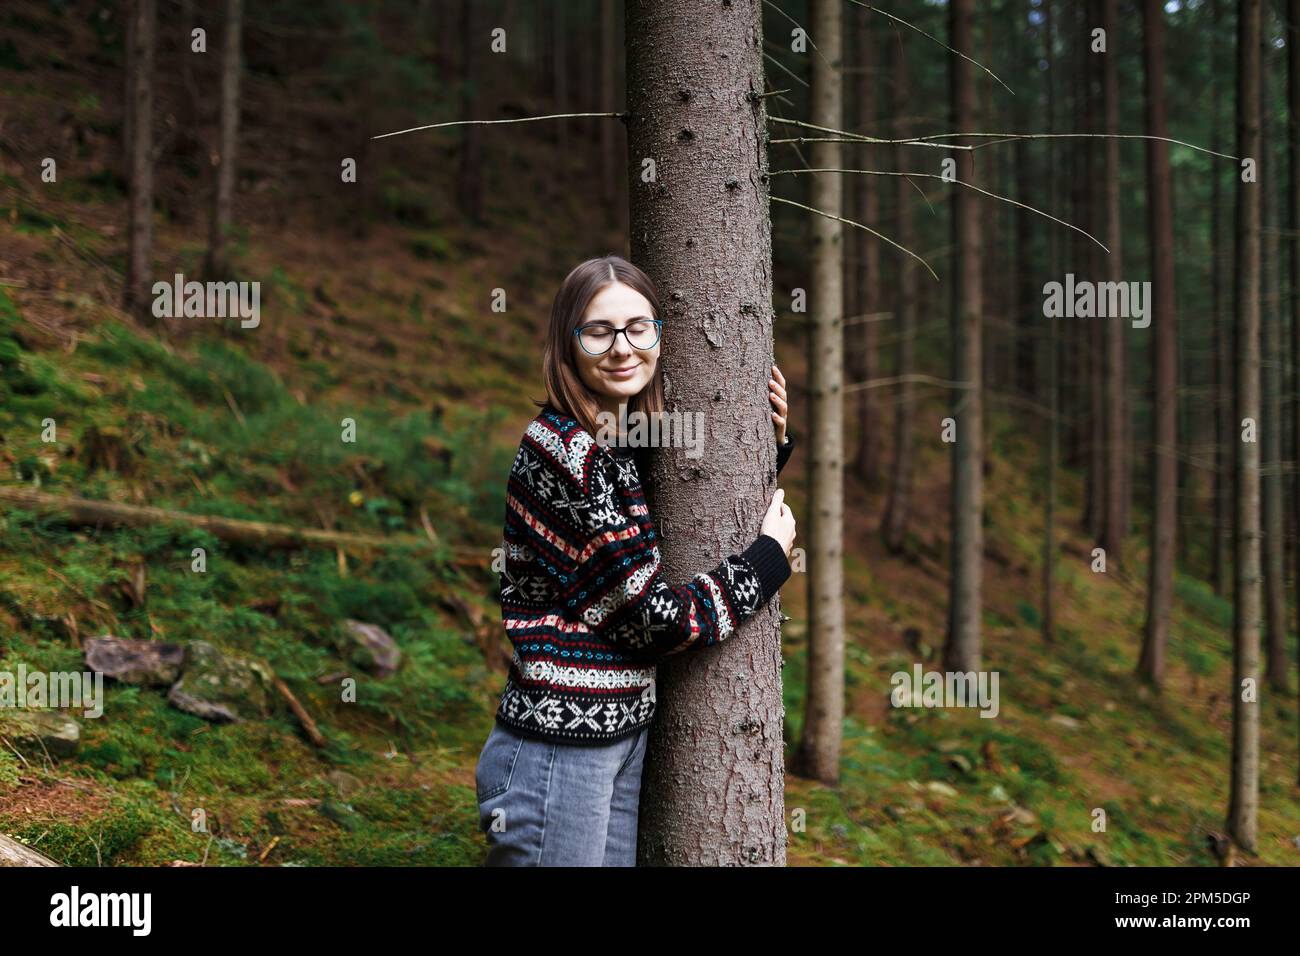 woman enjoying nature in forest hugging a tree trunk in silence alone Stock Photo